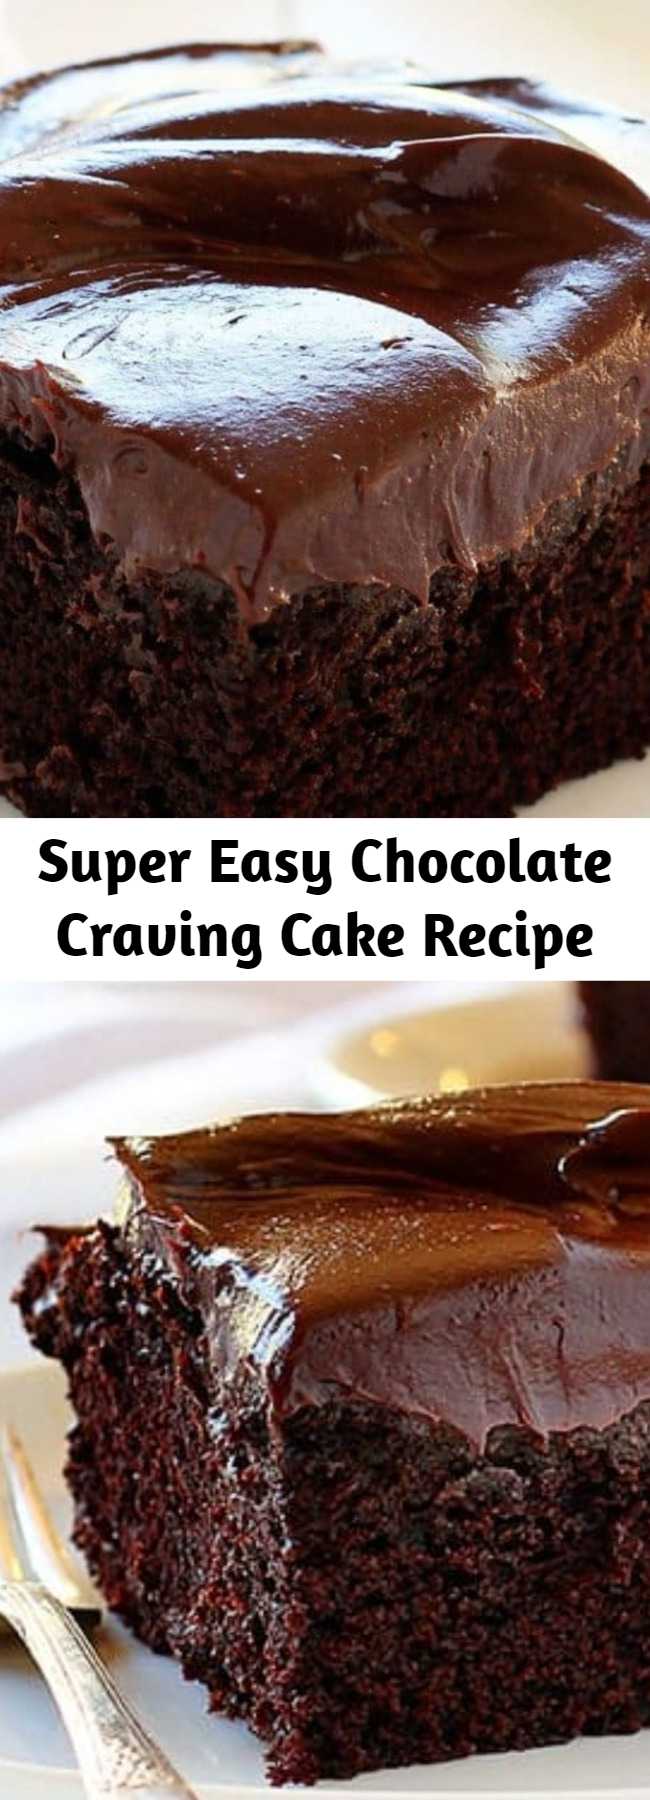 Super Easy Chocolate Craving Cake Recipe - This homemade Valentine treat is one of the best chocolate cake recipes! Chocolate Craving Cake is what dreams are made of - decadent, rich chocolate flavor paired with chocolate frosting. A satisfying dessert without the fuss! Save this Valentine's Day food idea!